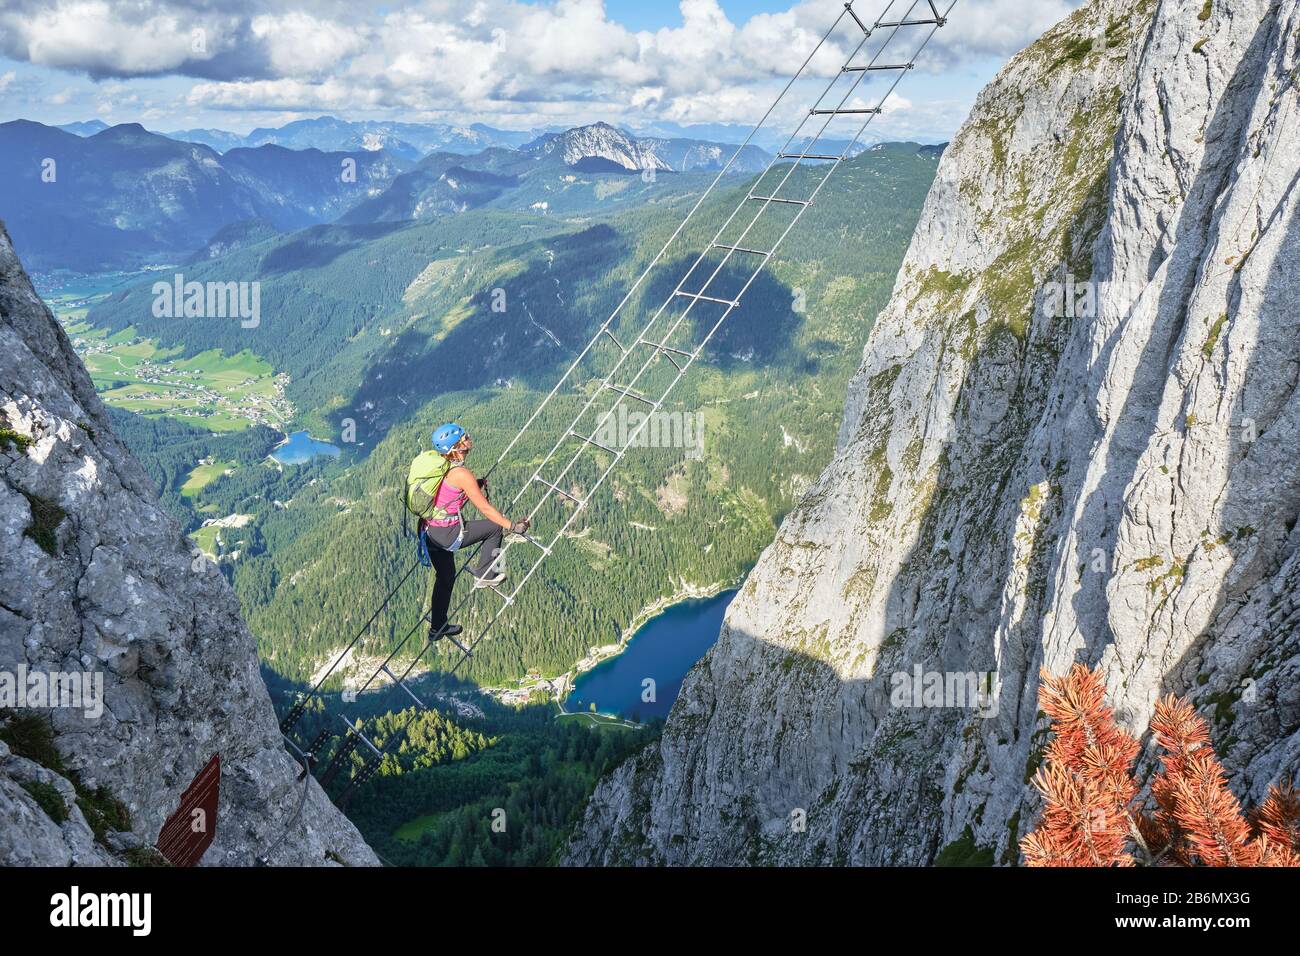 Woman on via ferrata ladder above Gosau lake, on the Intersport Klettersteig Donnerkogel route, in Austria. High angle view on a Summer day. Stock Photo